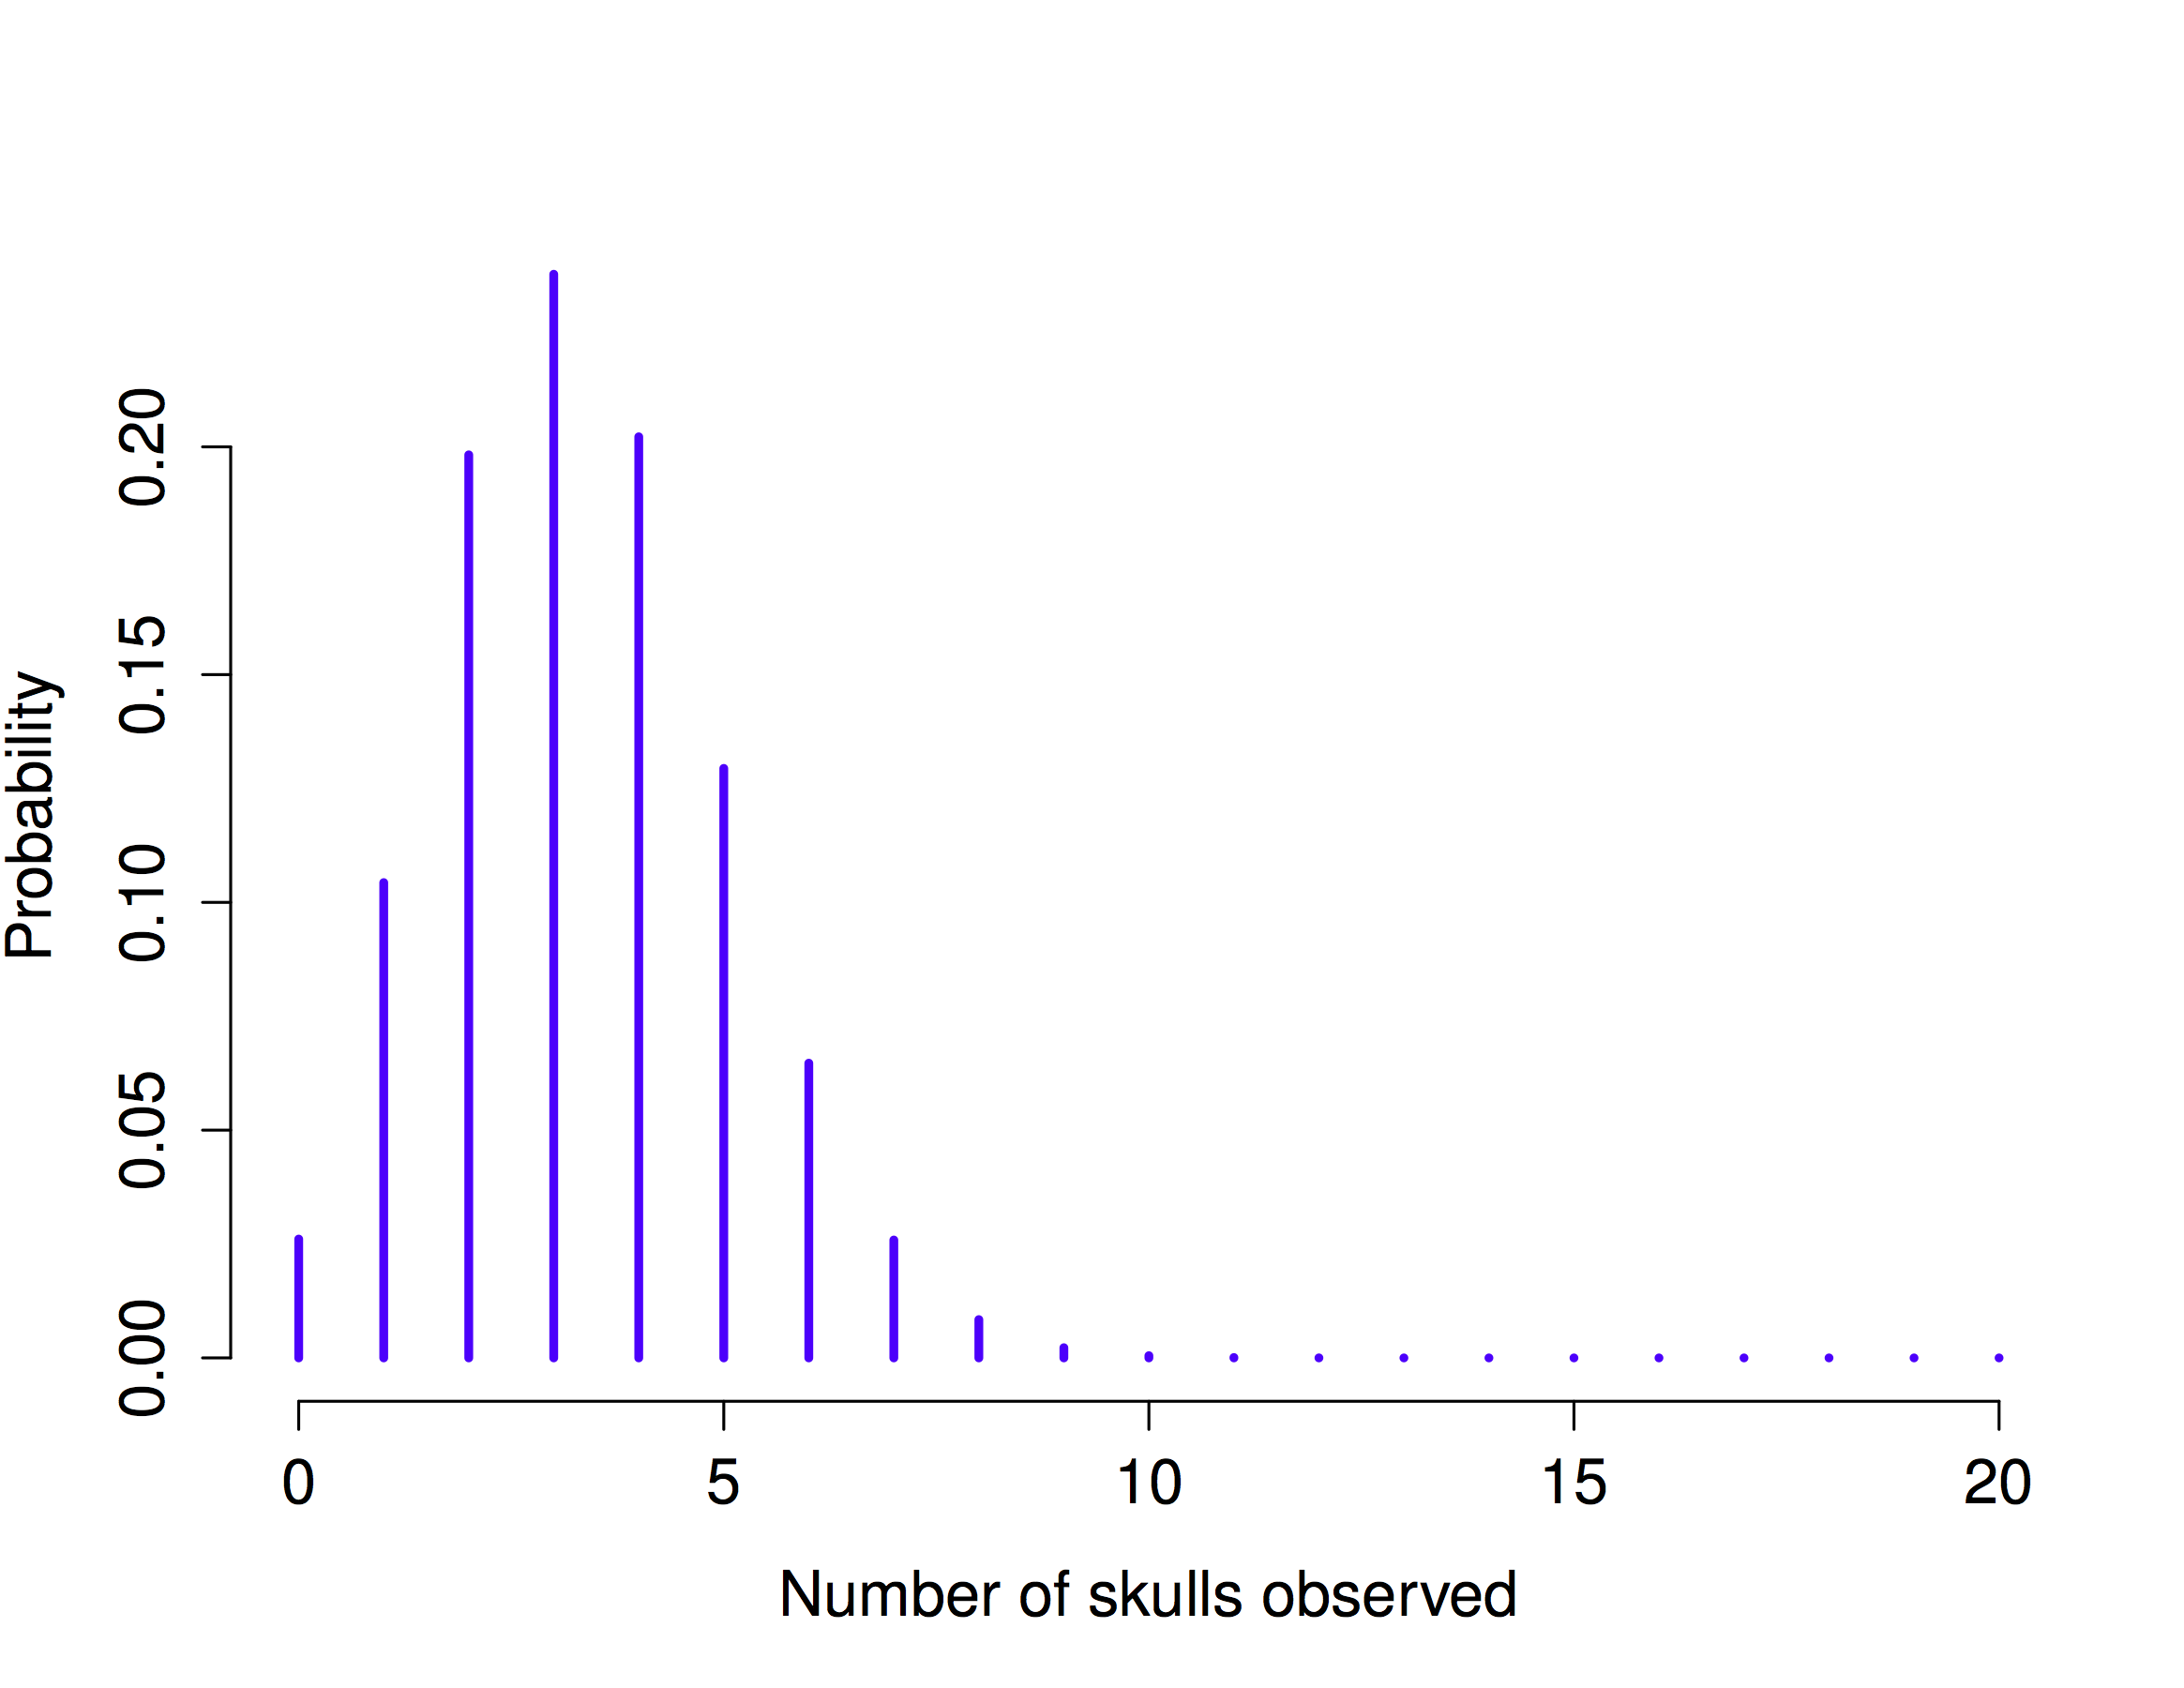 The binomial distribution with size parameter of N =20 and an underlying success probability of 1/6. Each vertical bar depicts the probability of one specific outcome (i.e., one possible value of X). Because this is a probability distribution, each of the probabilities must be a number between 0 and 1, and the heights of the bars must sum to 1 as well.